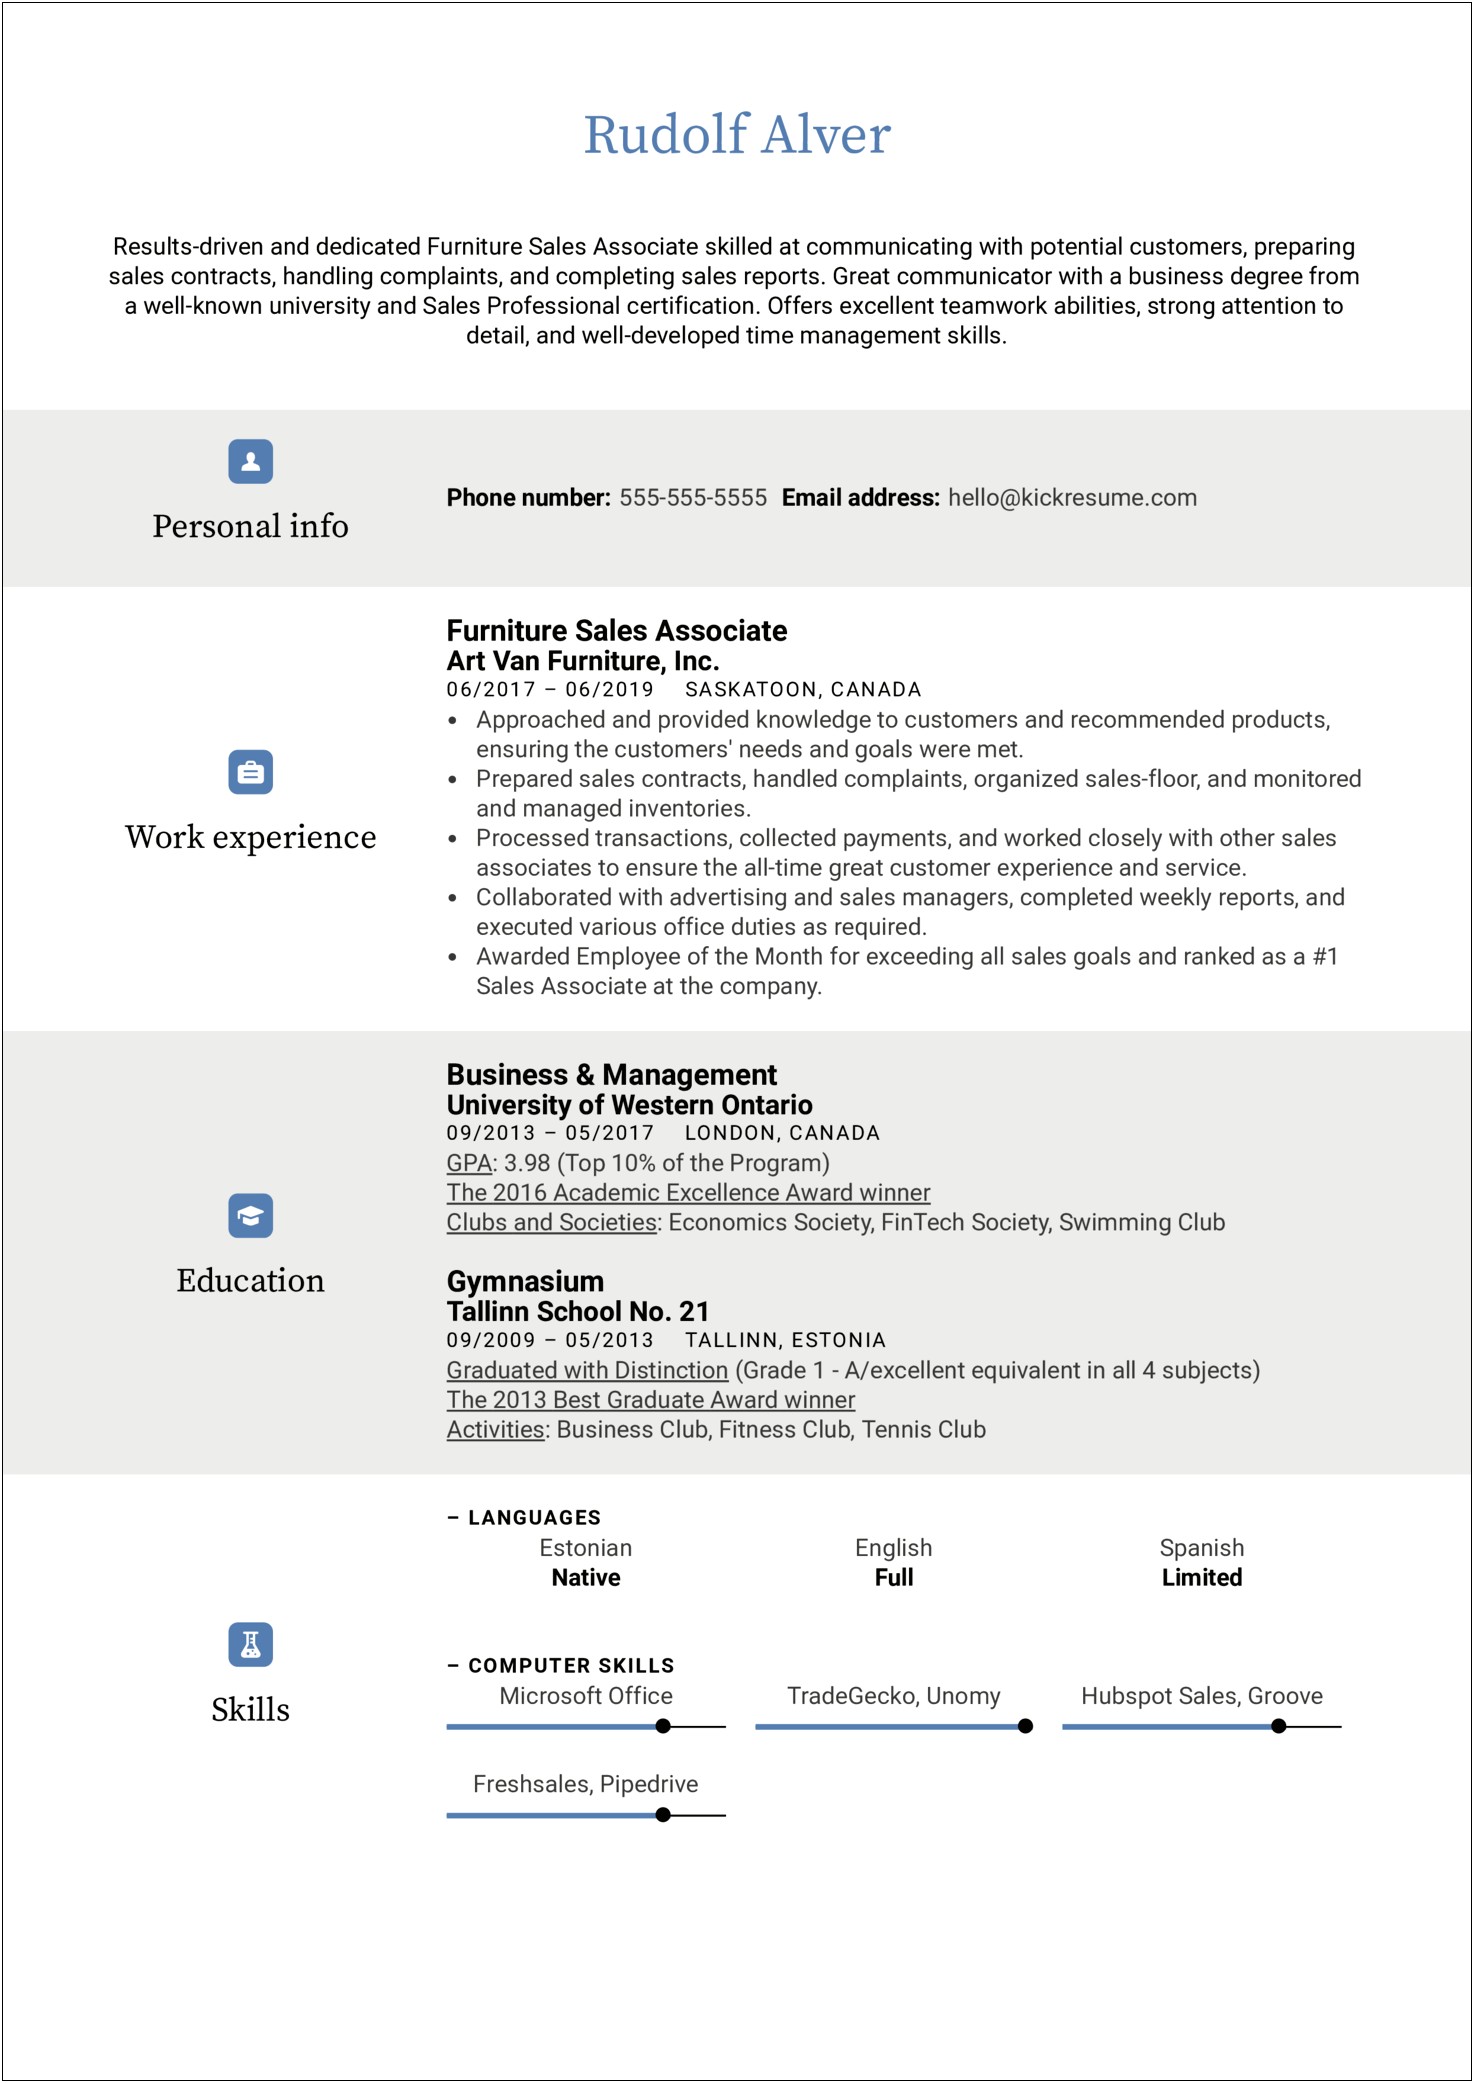 Sample Resume For Retail Sales Position